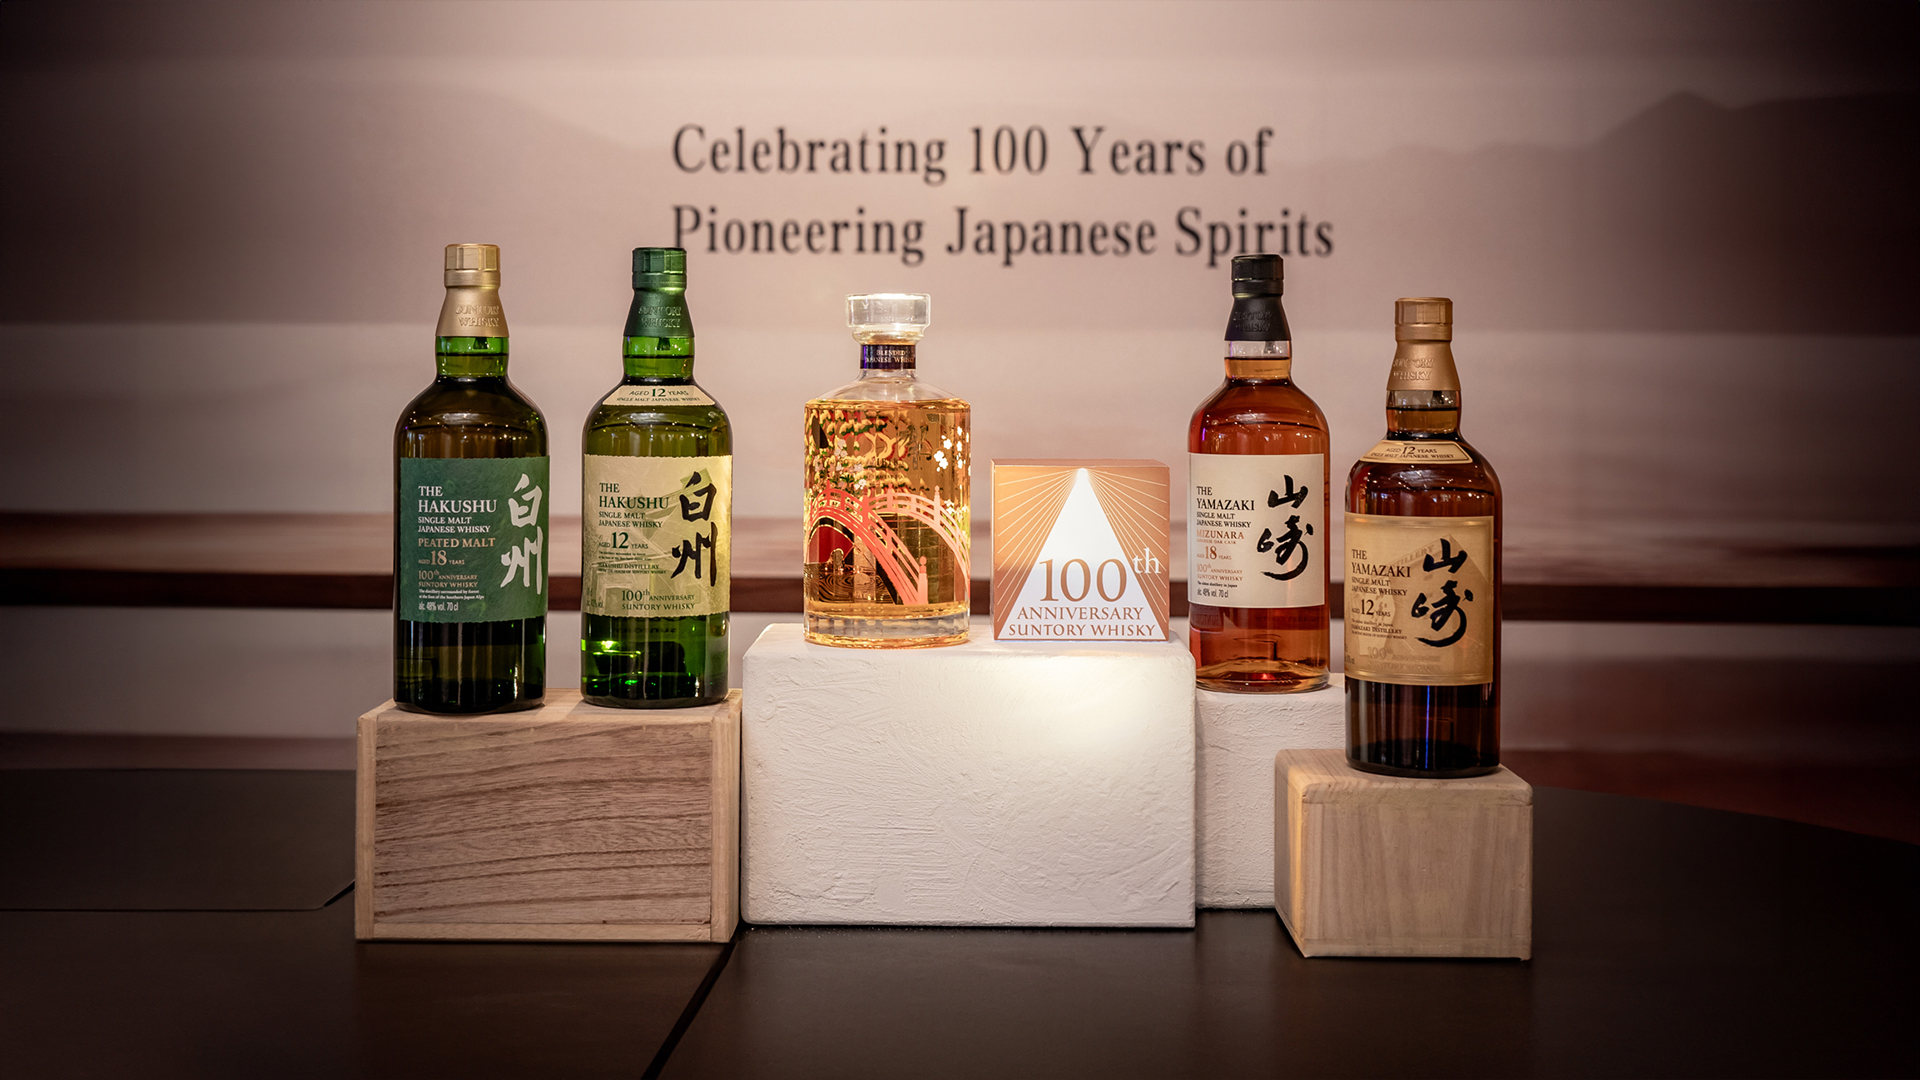 Marking 100 magnificent years: Whiskies cultivated in the finest Japanese distilleries